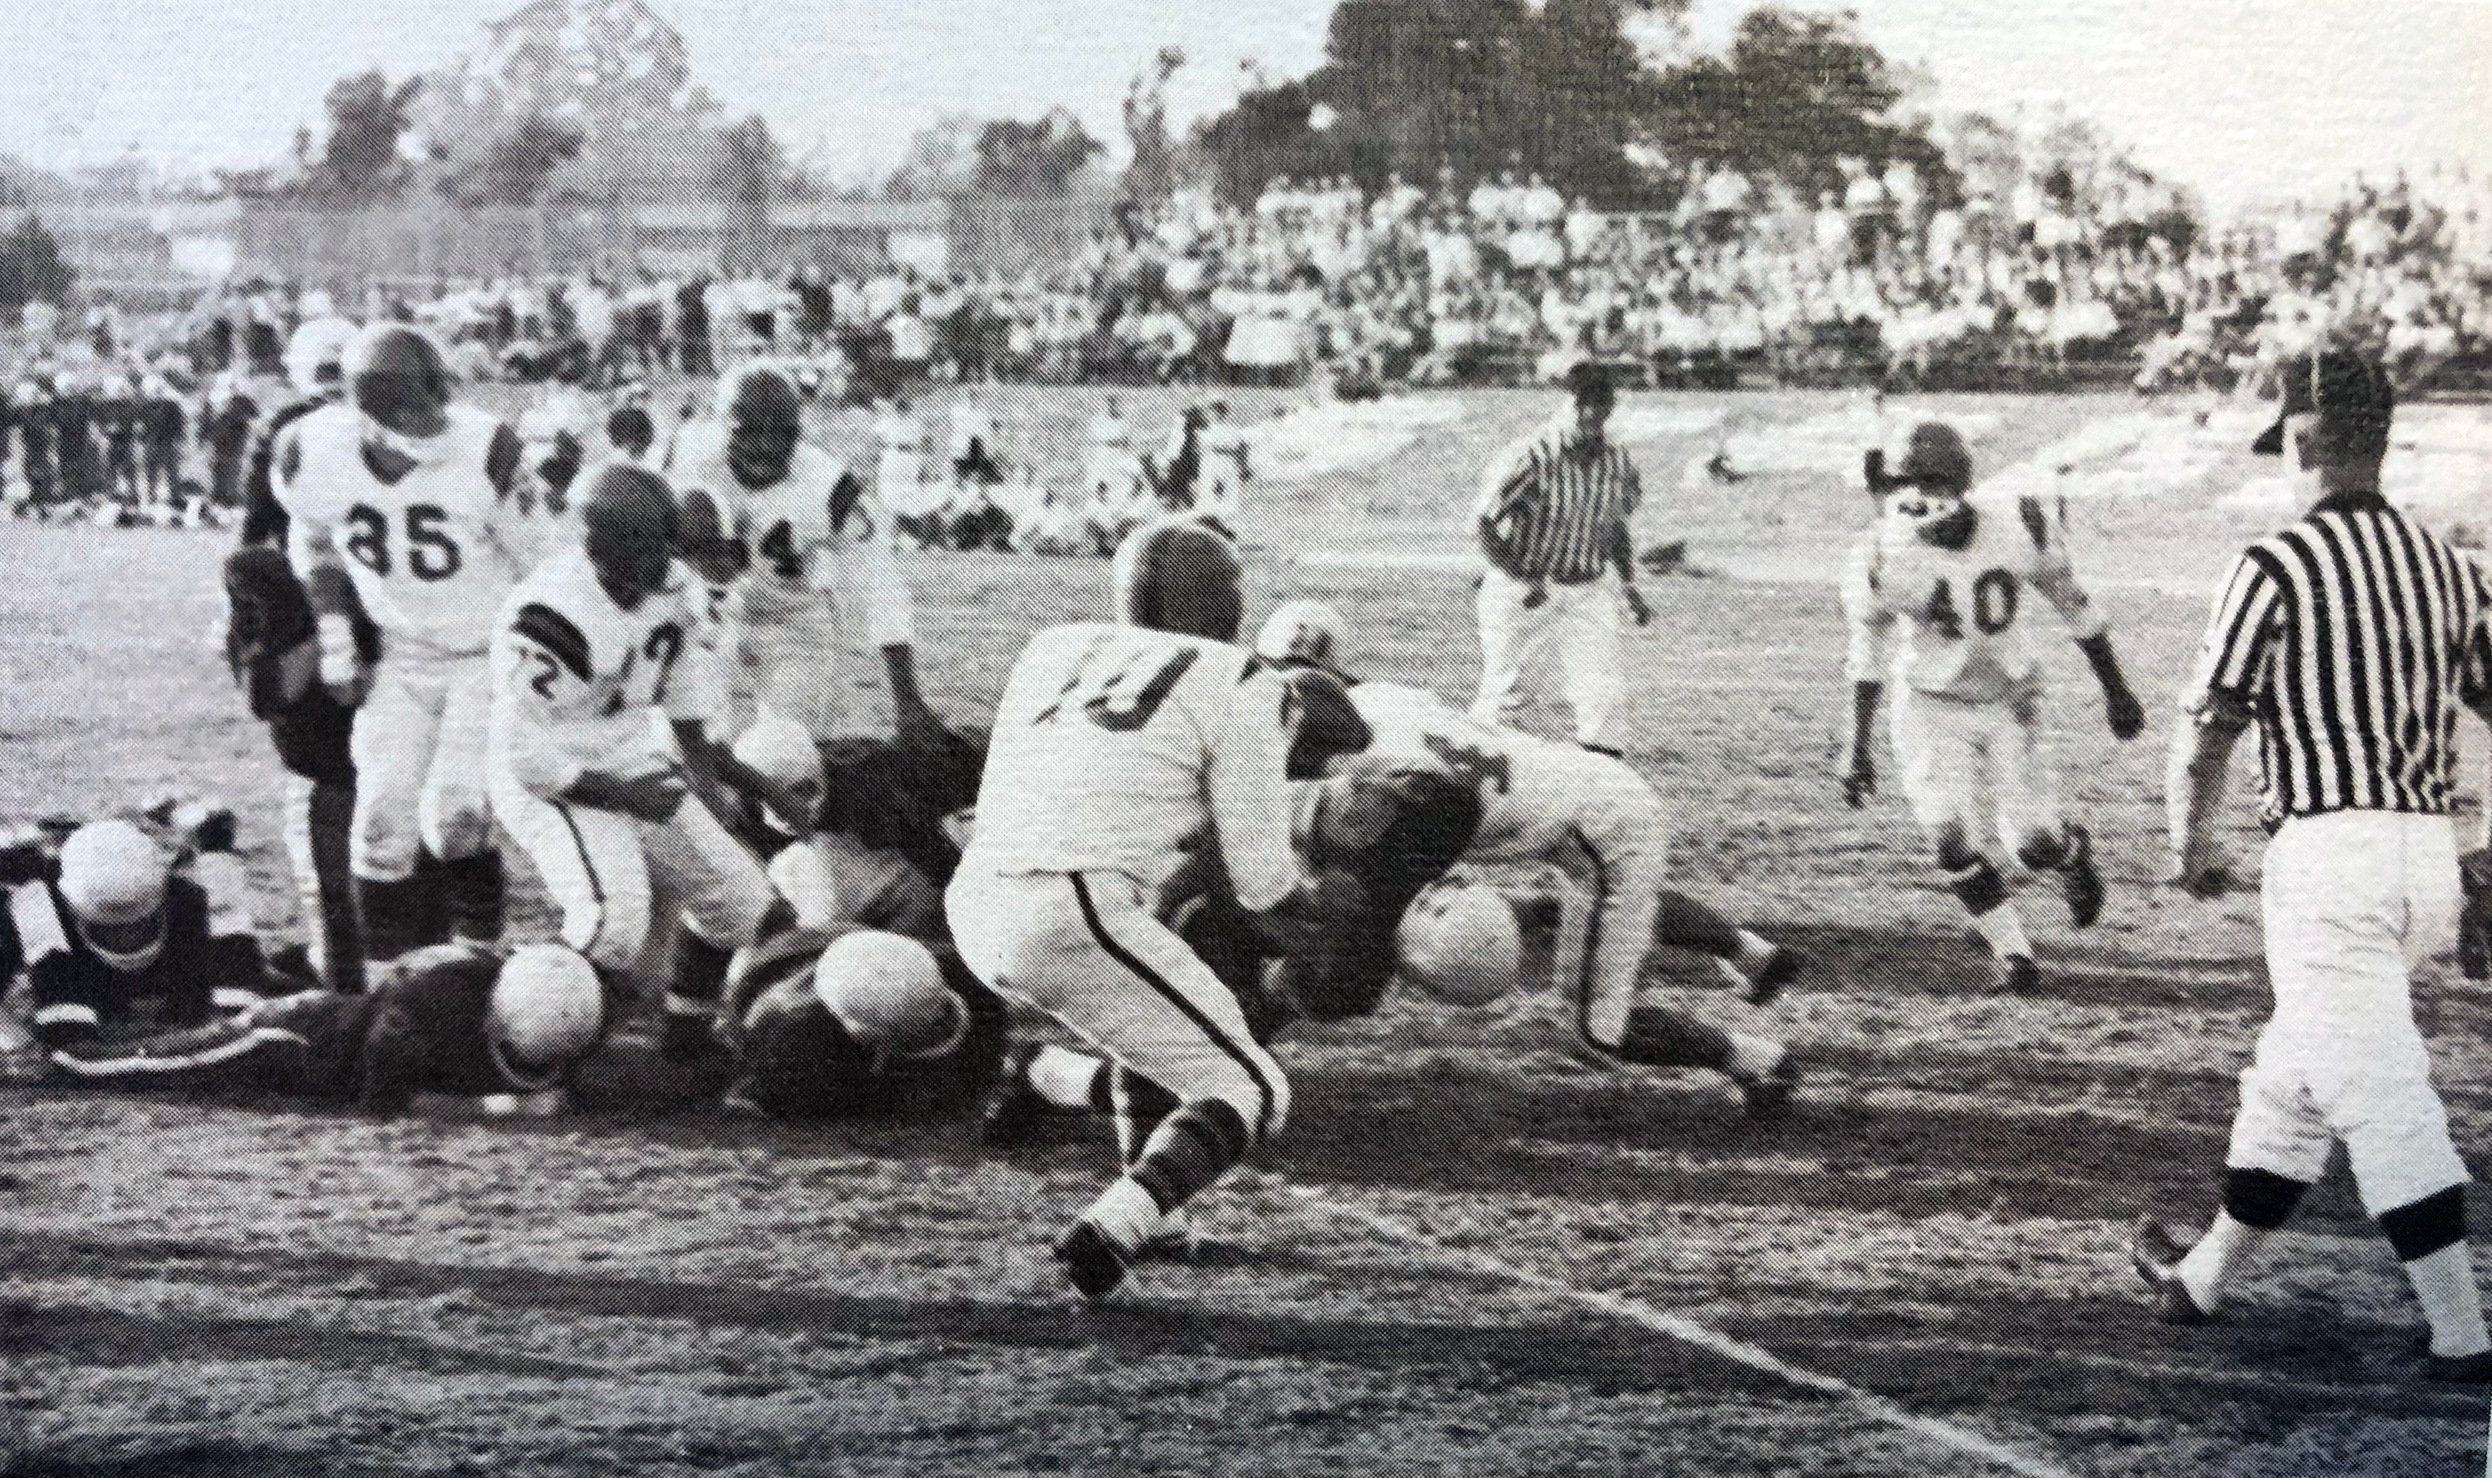 The 1960 football team in action